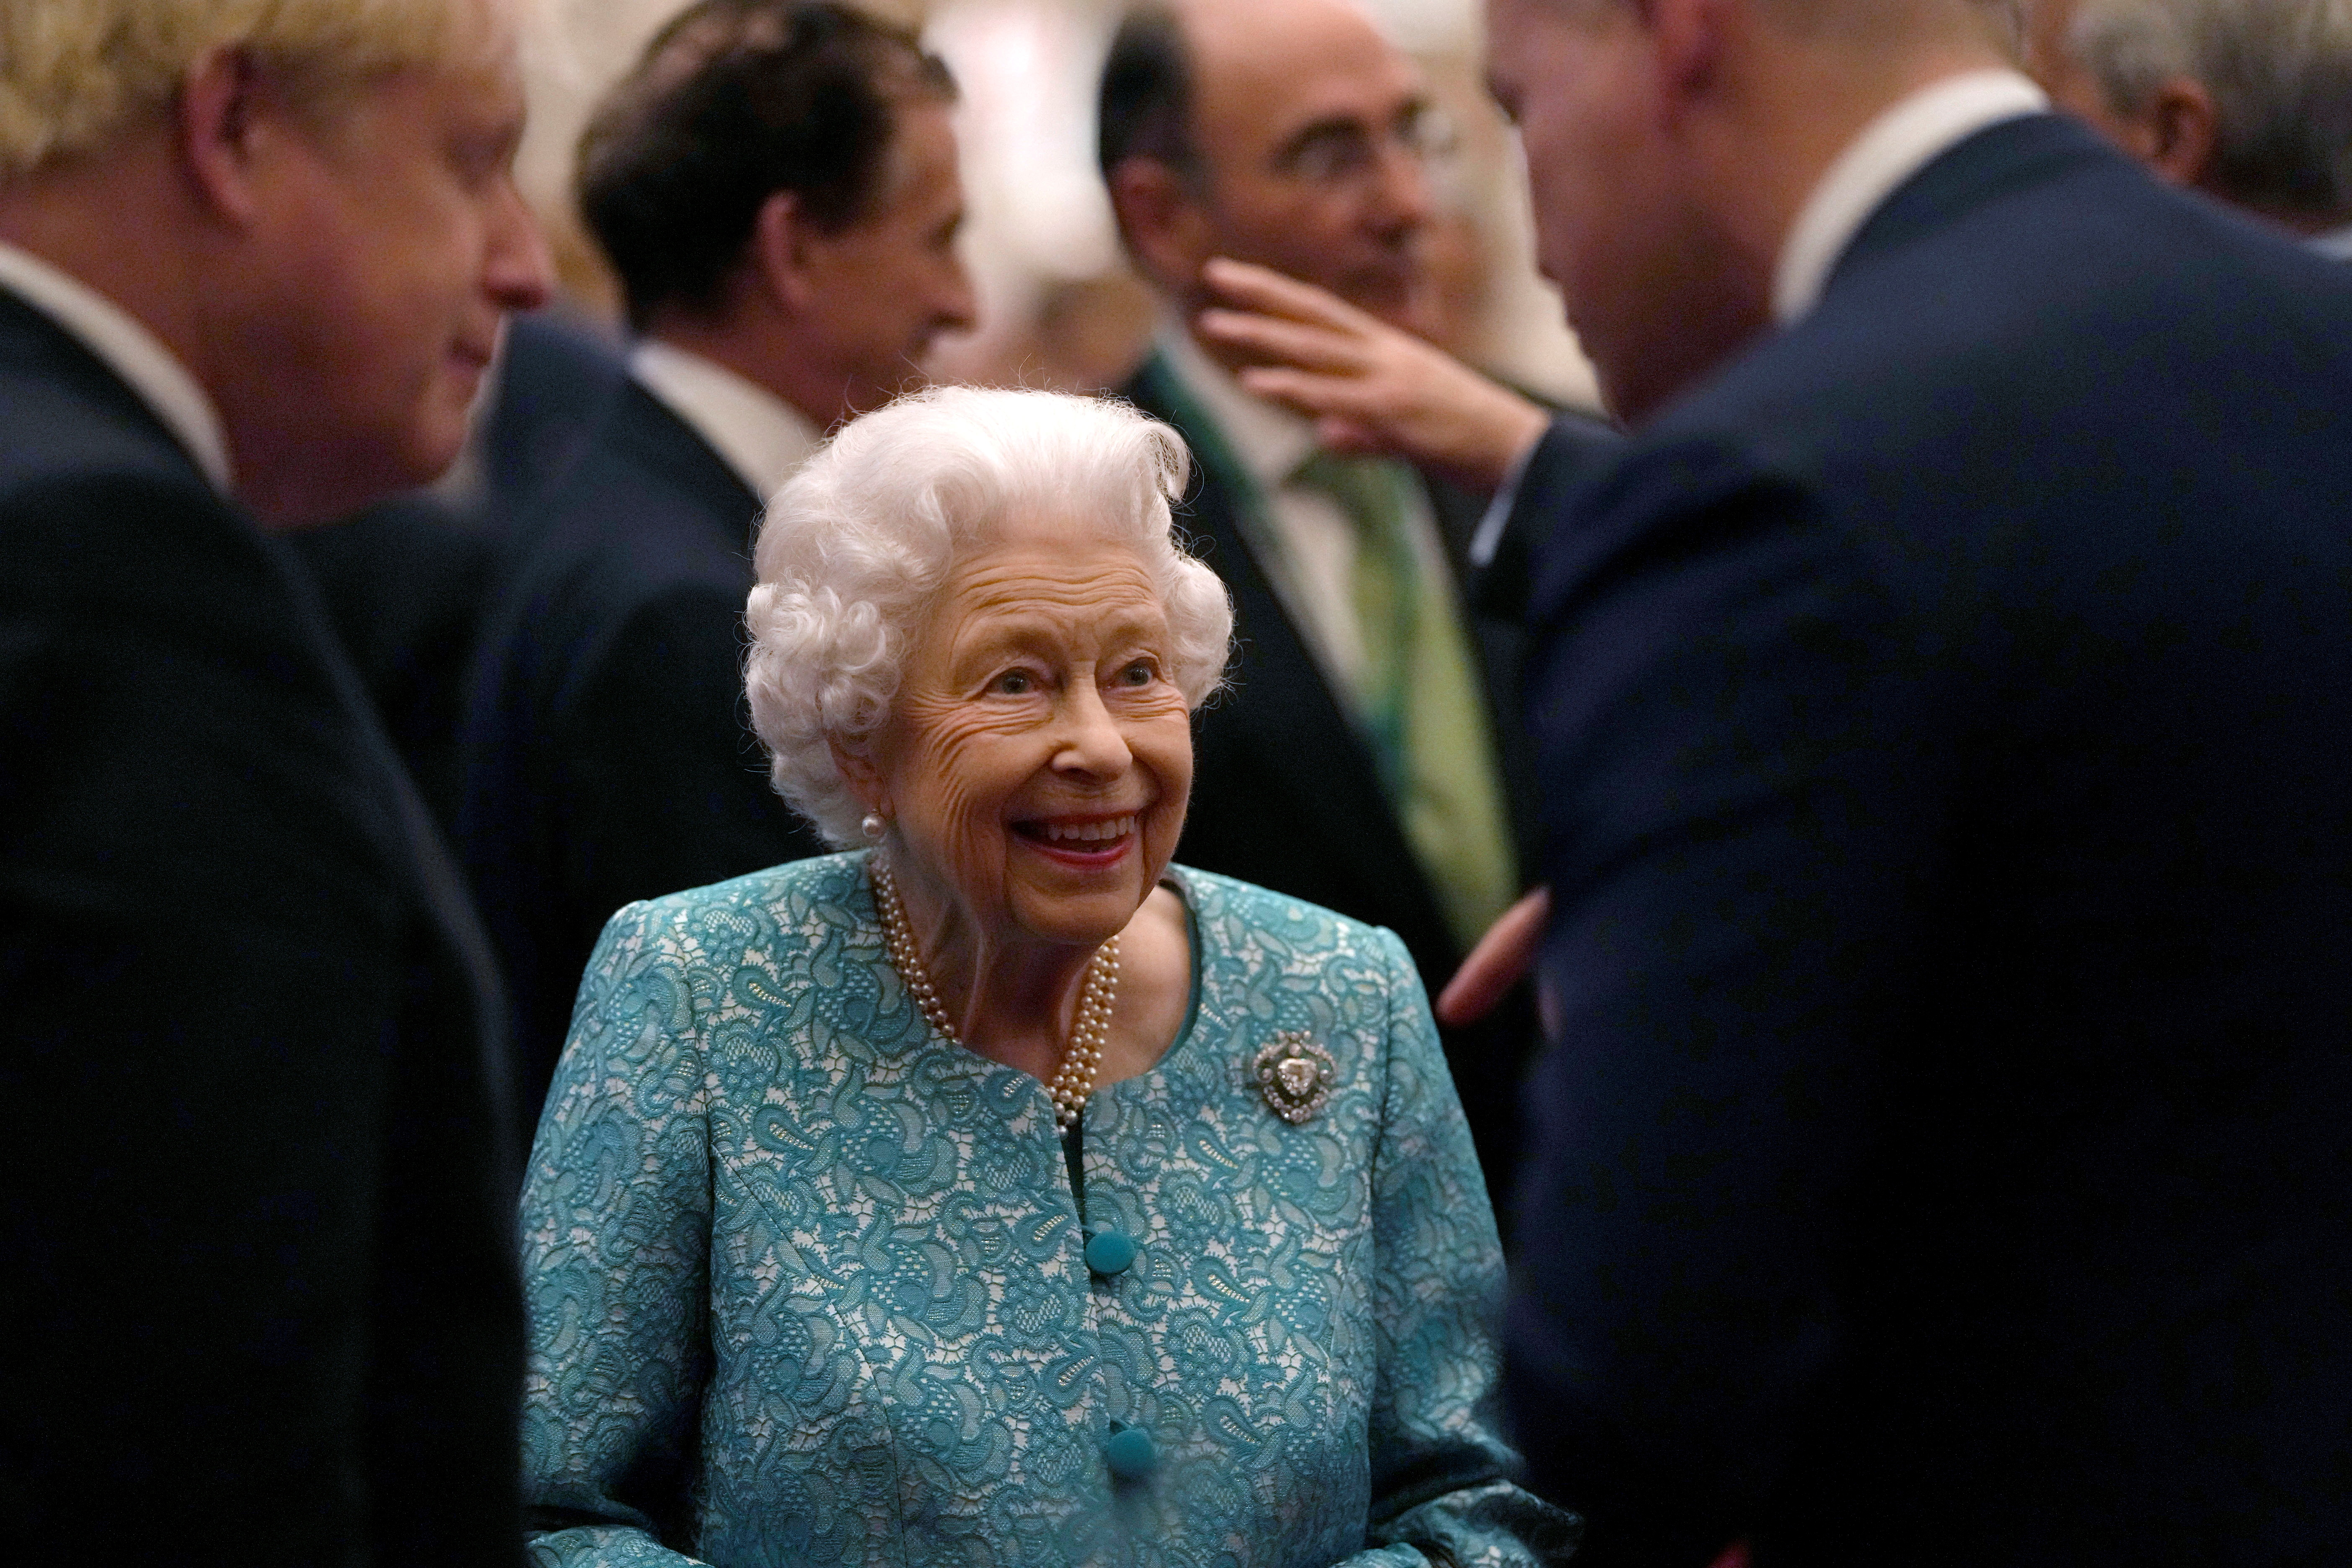 Britain's Queen Elizabeth and members of the Royal Family host a reception for international business and investment leaders at Windsor Castle